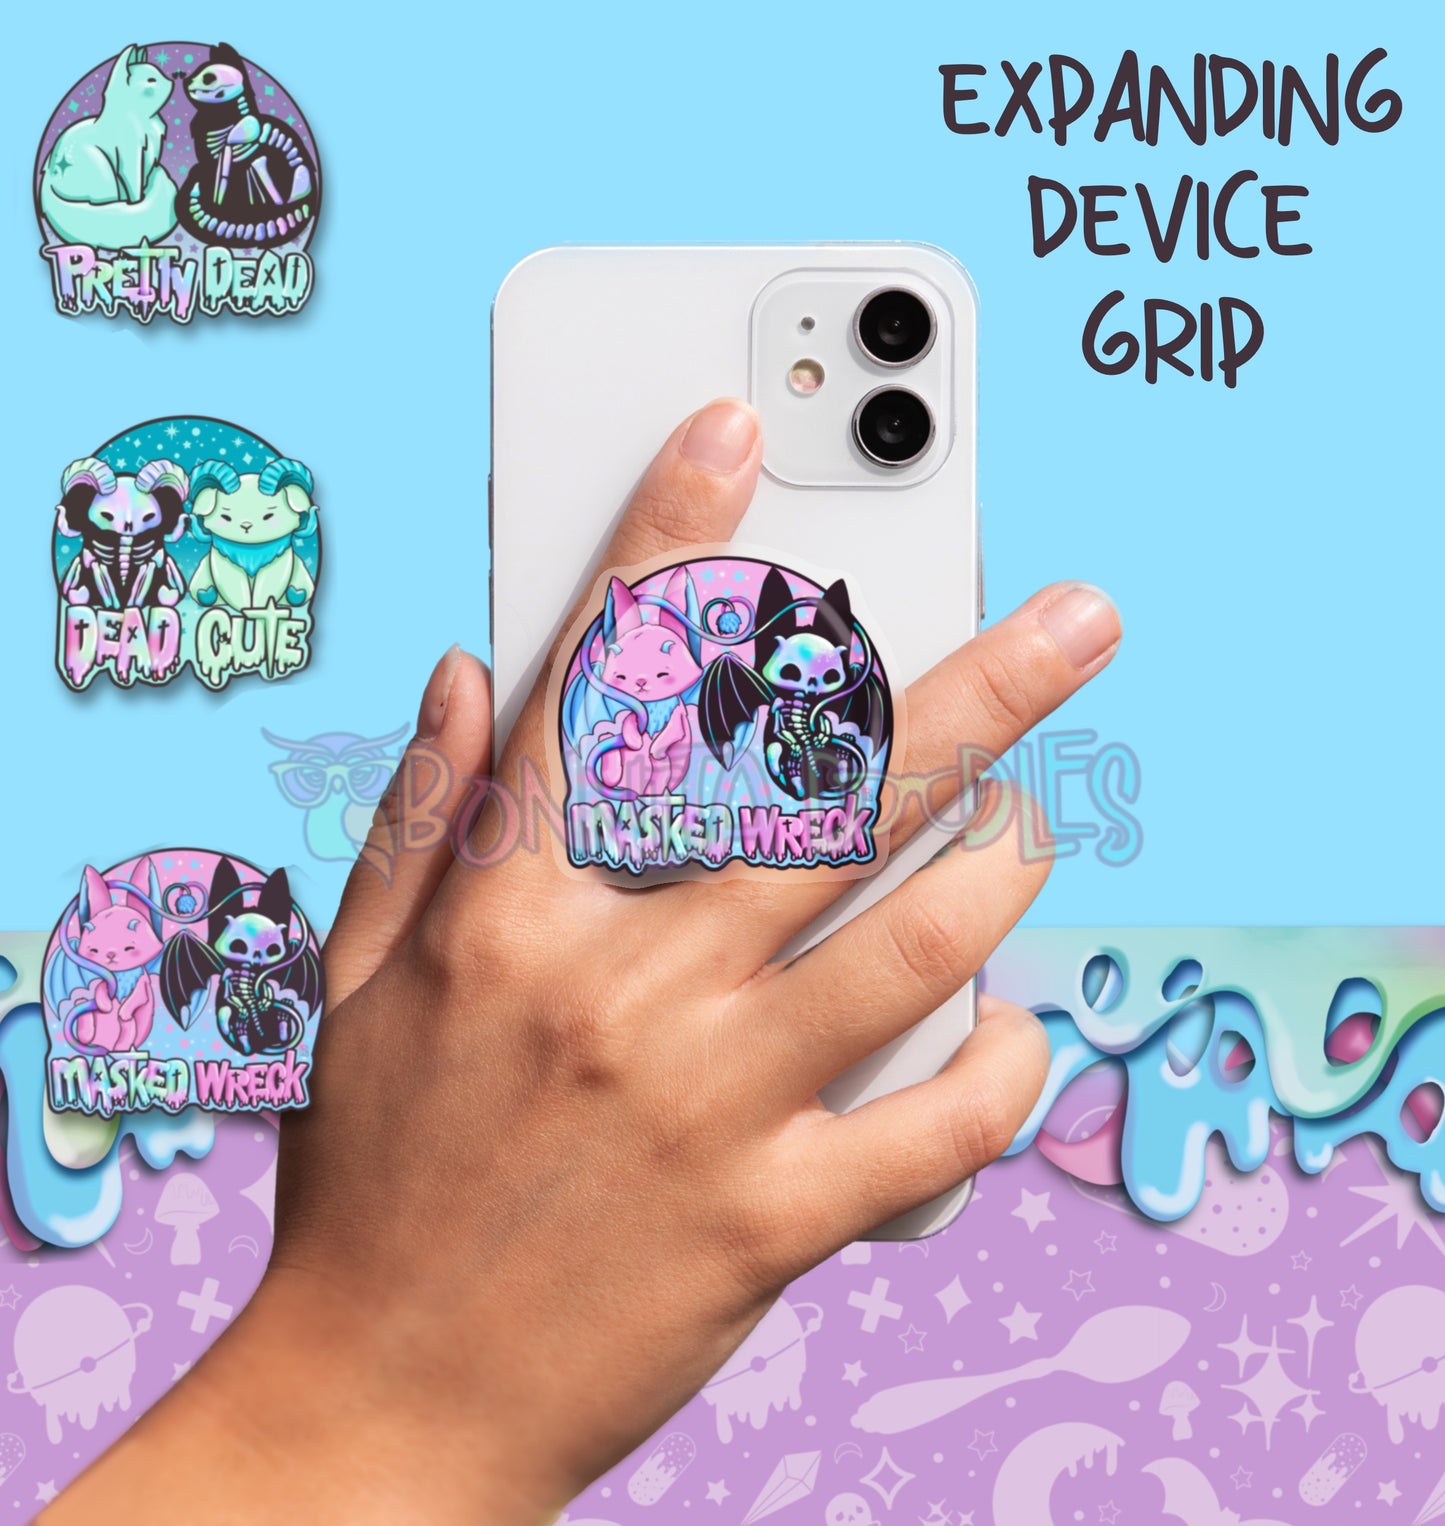 Phone/device Grip - 3 designs available